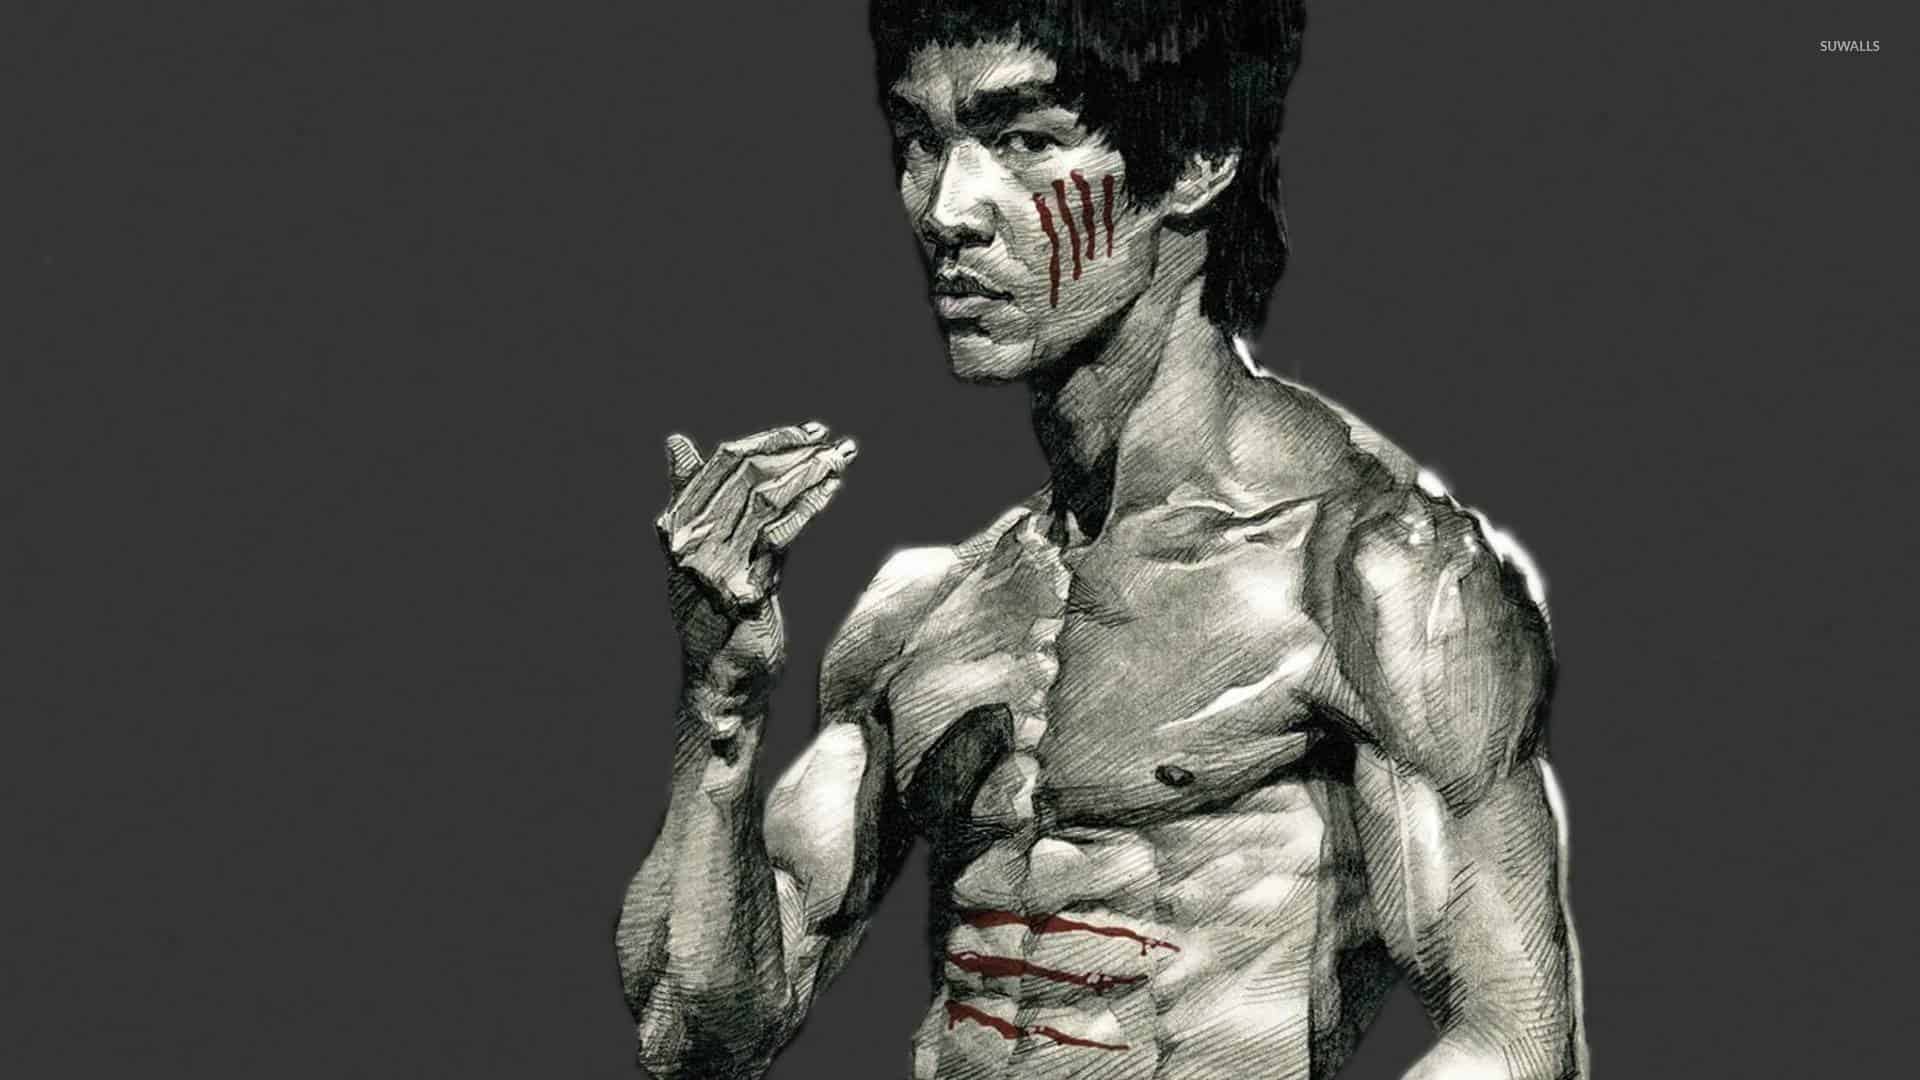 Bruce Lee Abs Workout to Build Extremely Strong Six Pack